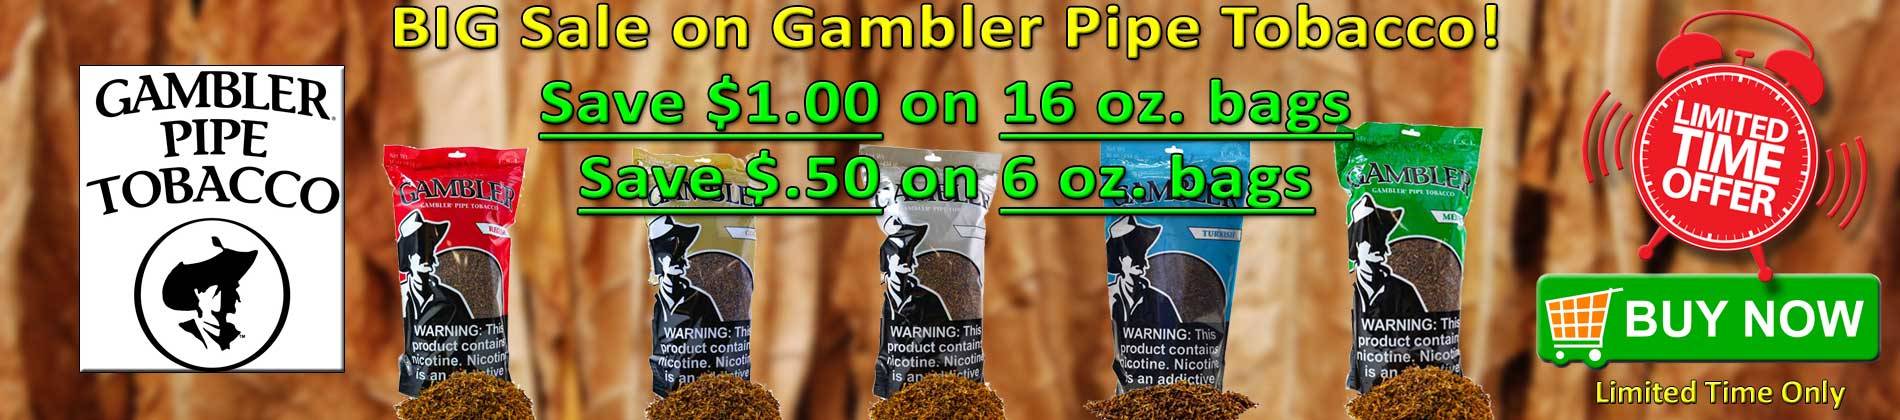 https://www.smokersoutletonline.com/pipe-tobacco/pipe-tobacco-by-the-bag/brands/gambler.html